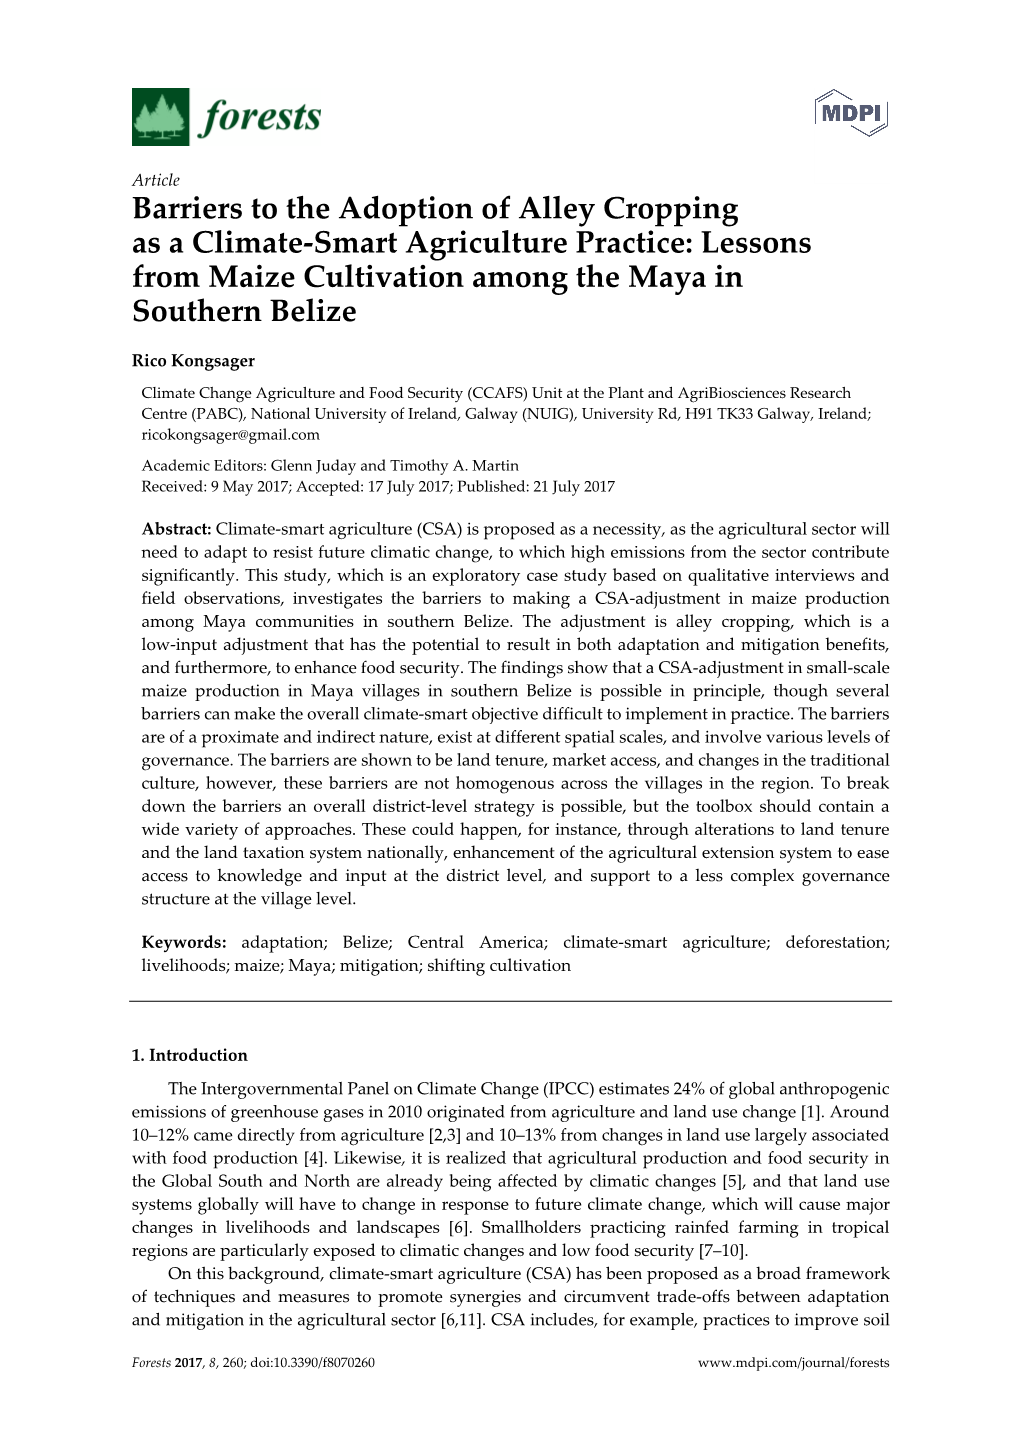 Barriers to the Adoption of Alley Cropping As a Climate-Smart Agriculture Practice: Lessons from Maize Cultivation Among the Maya in Southern Belize